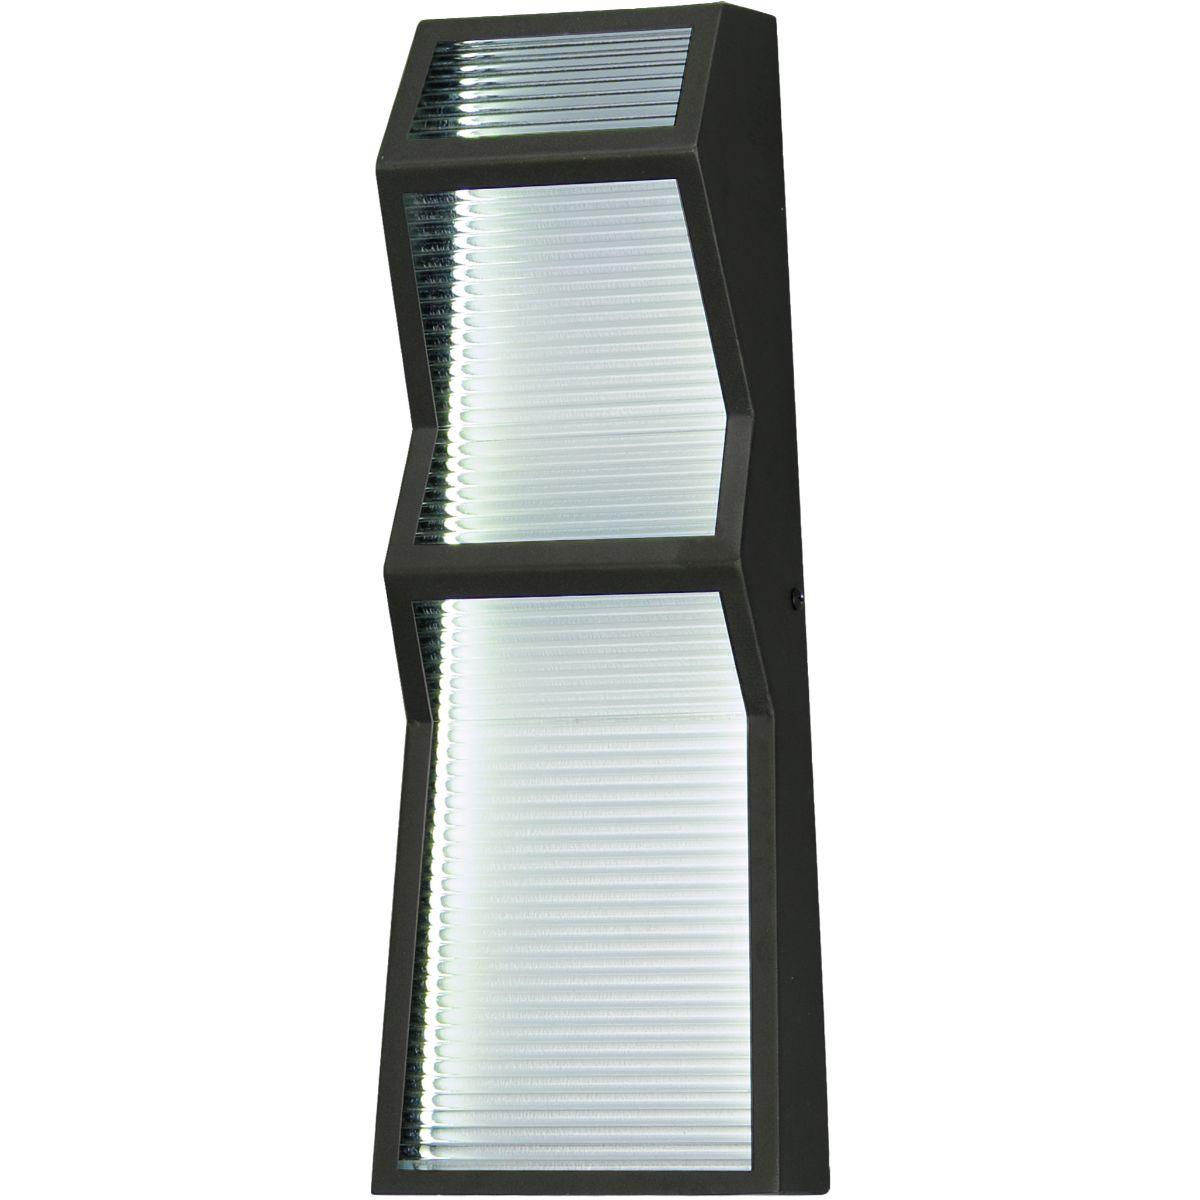 Totem 16 in. LED Outdoor Wall Sconce 3000K Black Finish